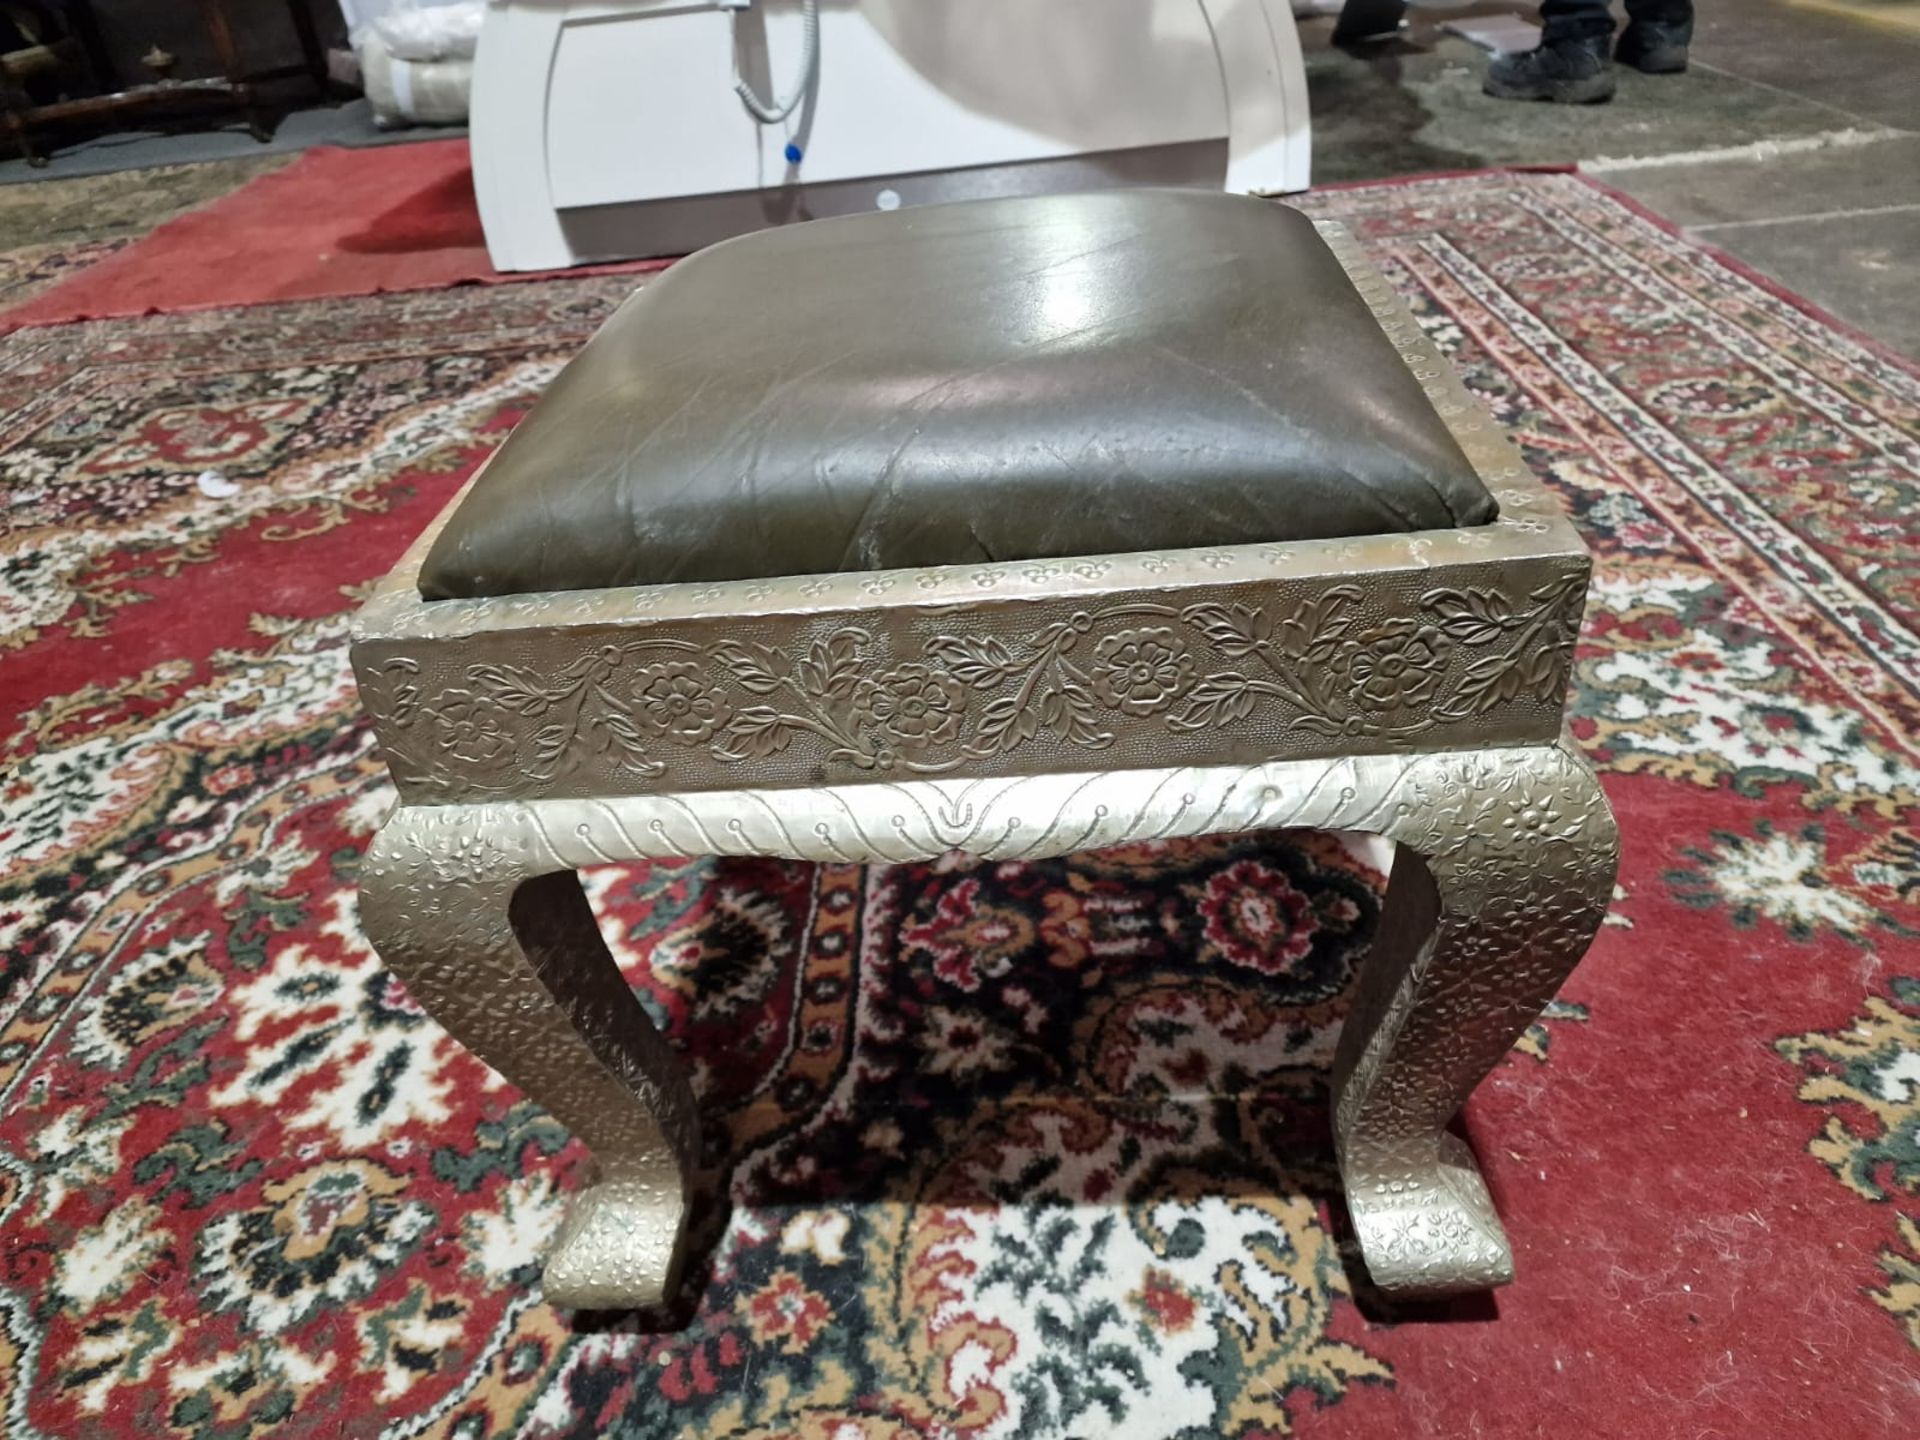 Dowry Chair And Footstool A Striking Vintage Anglo-Indian Silvered Metal-Clad Chair, 20th Century, - Image 2 of 16